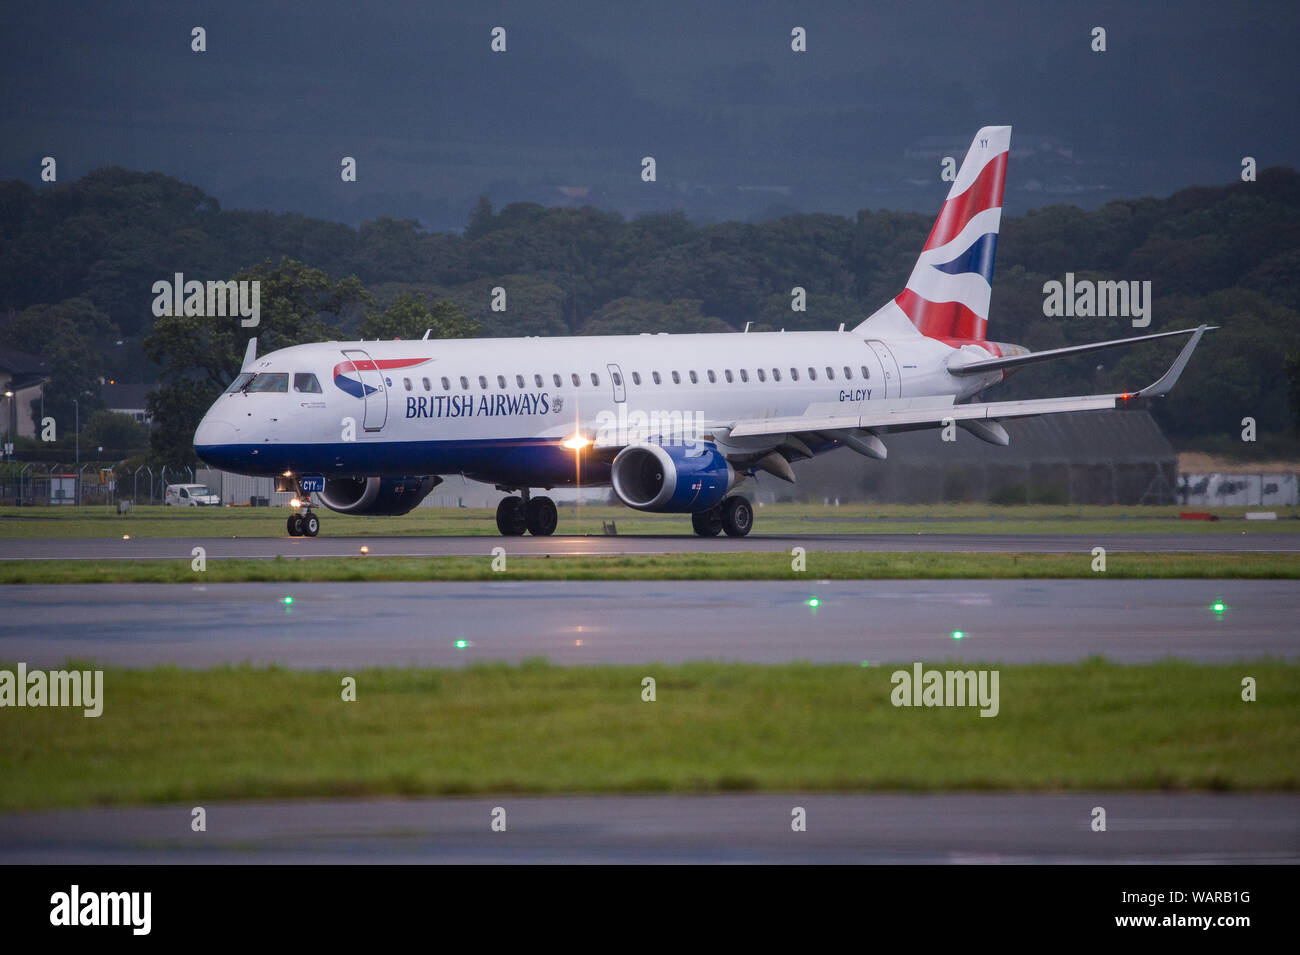 Glasgow, UK. 21 August 2019. Rainy day at Glasgow International Airport.  Colin Fisher/CDFIMAGES.COM Stock Photo